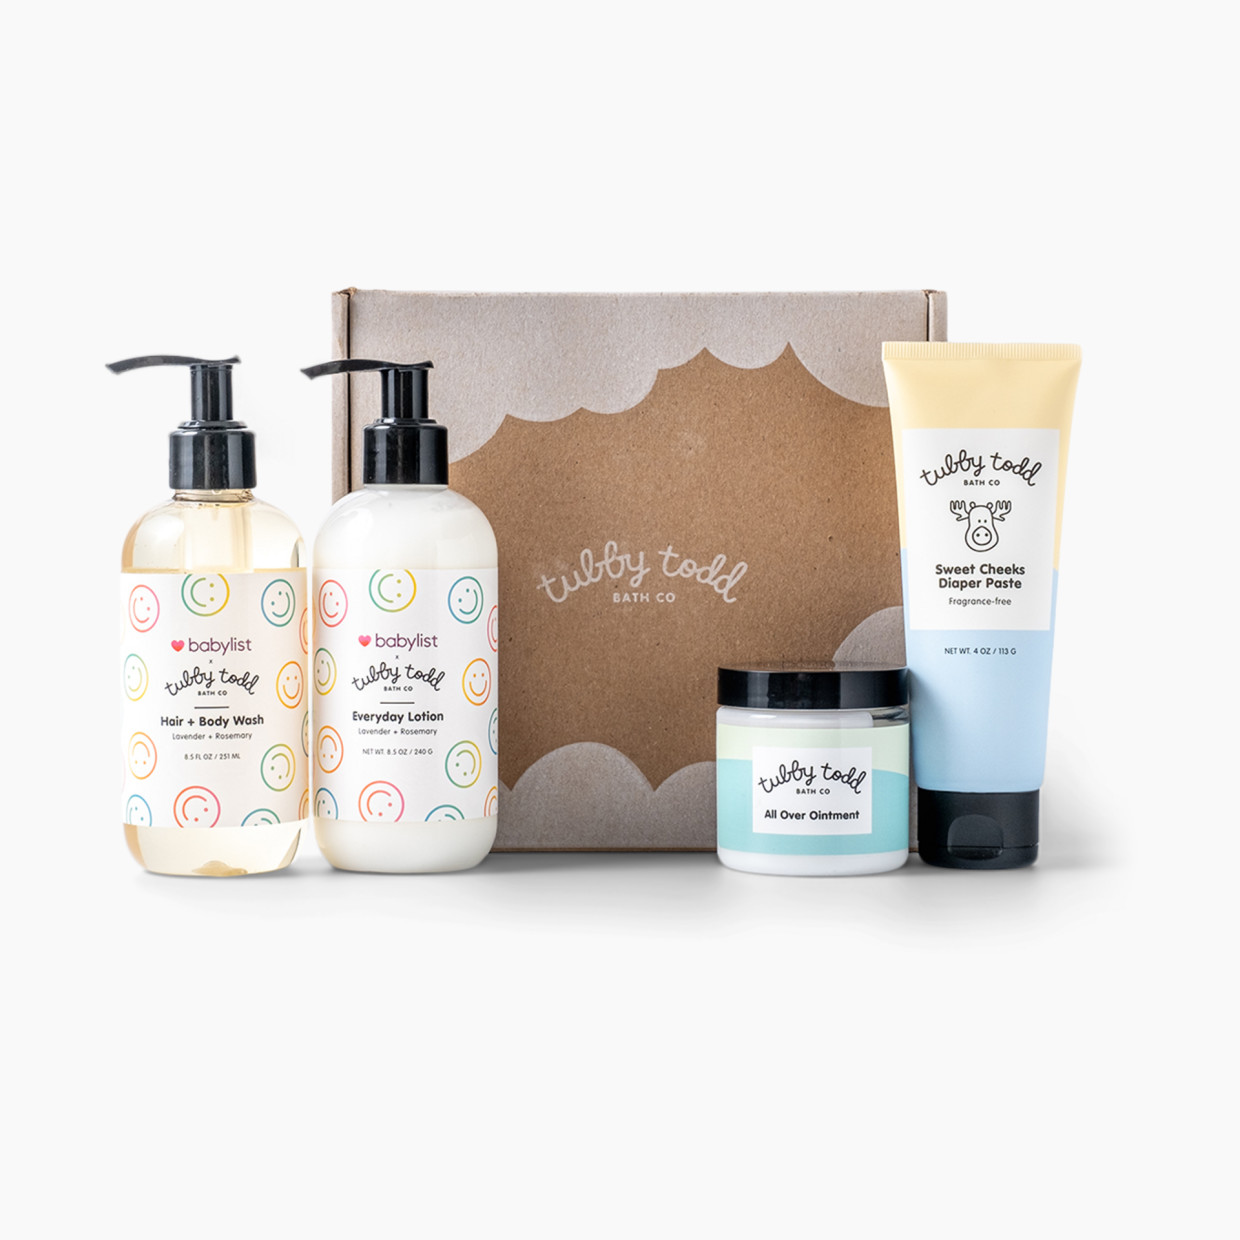 Tubby Todd Tubby Todd x Babylist Baby's First Year Skincare Gift Set